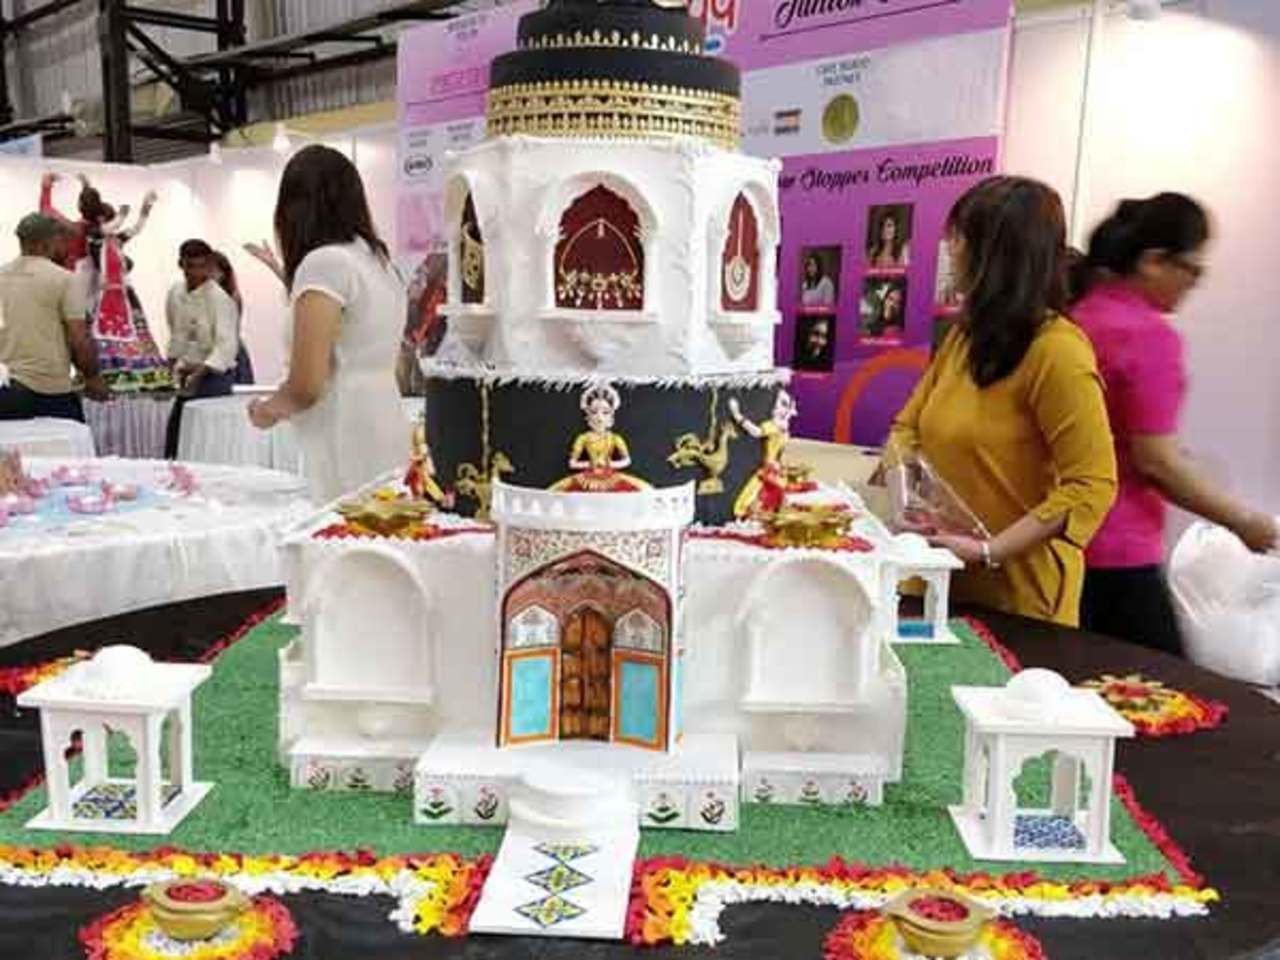 From a giant basilica to mythological cakes, a lot's on display at Bengaluru  cake show | Bangalore News - The Indian Express